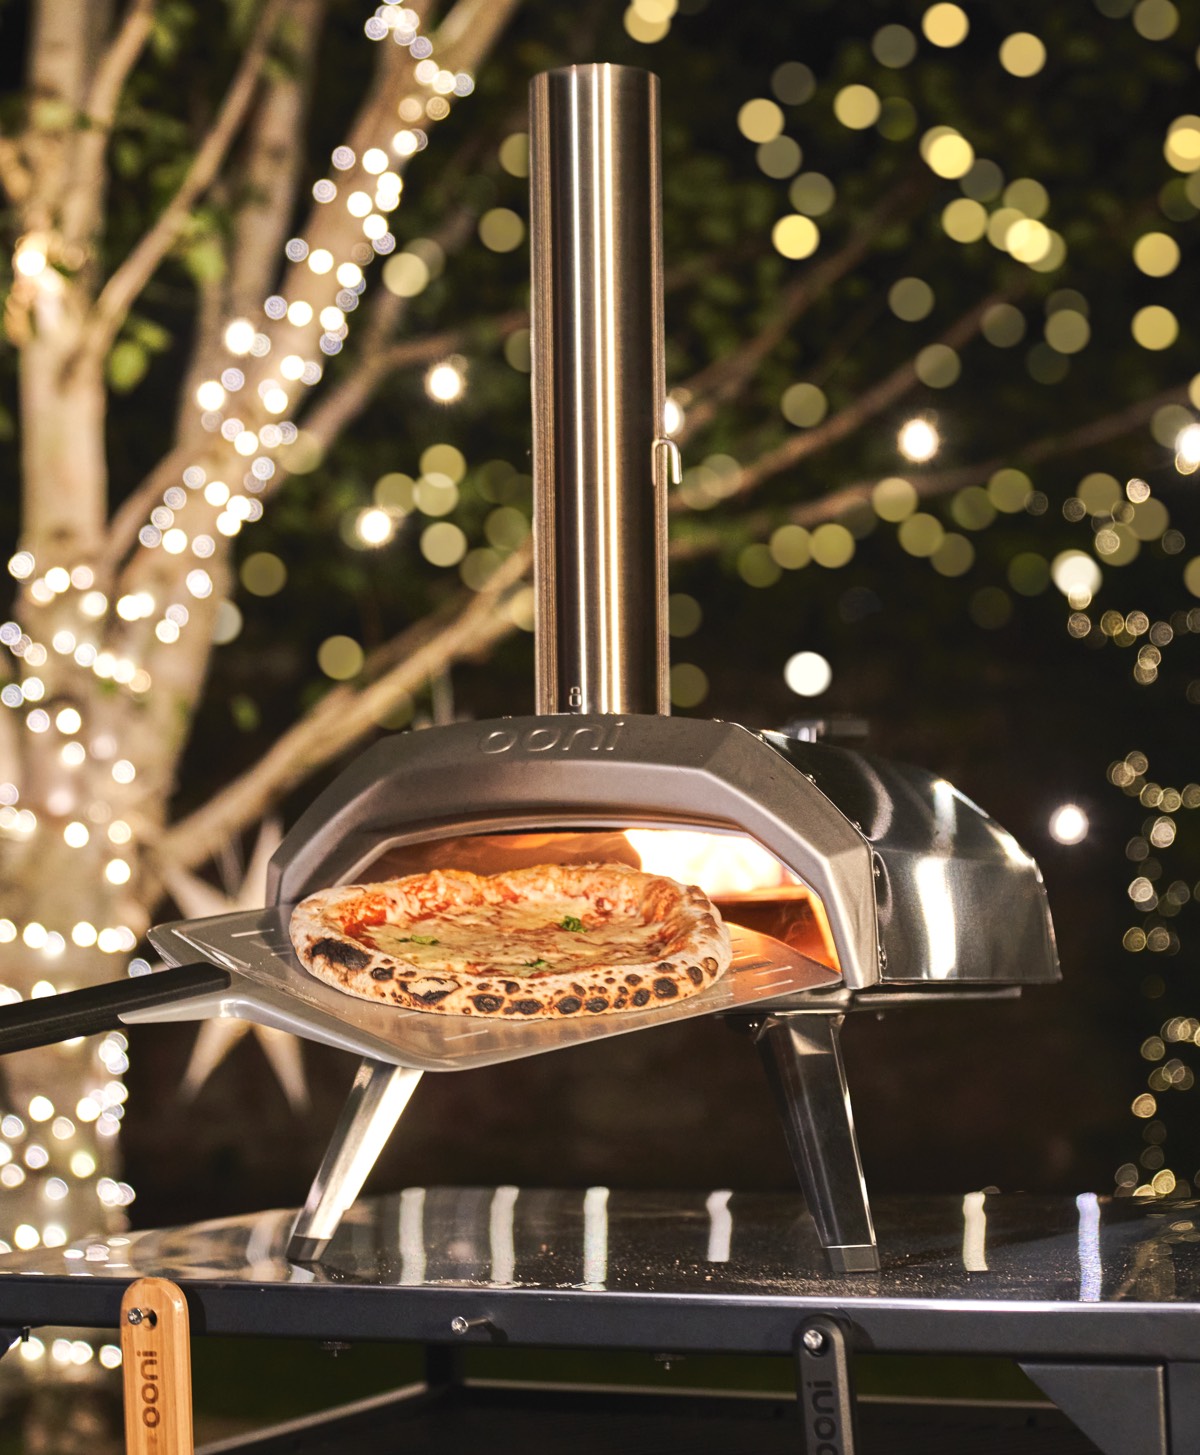 Win this fabulous Ooni Pizza Oven